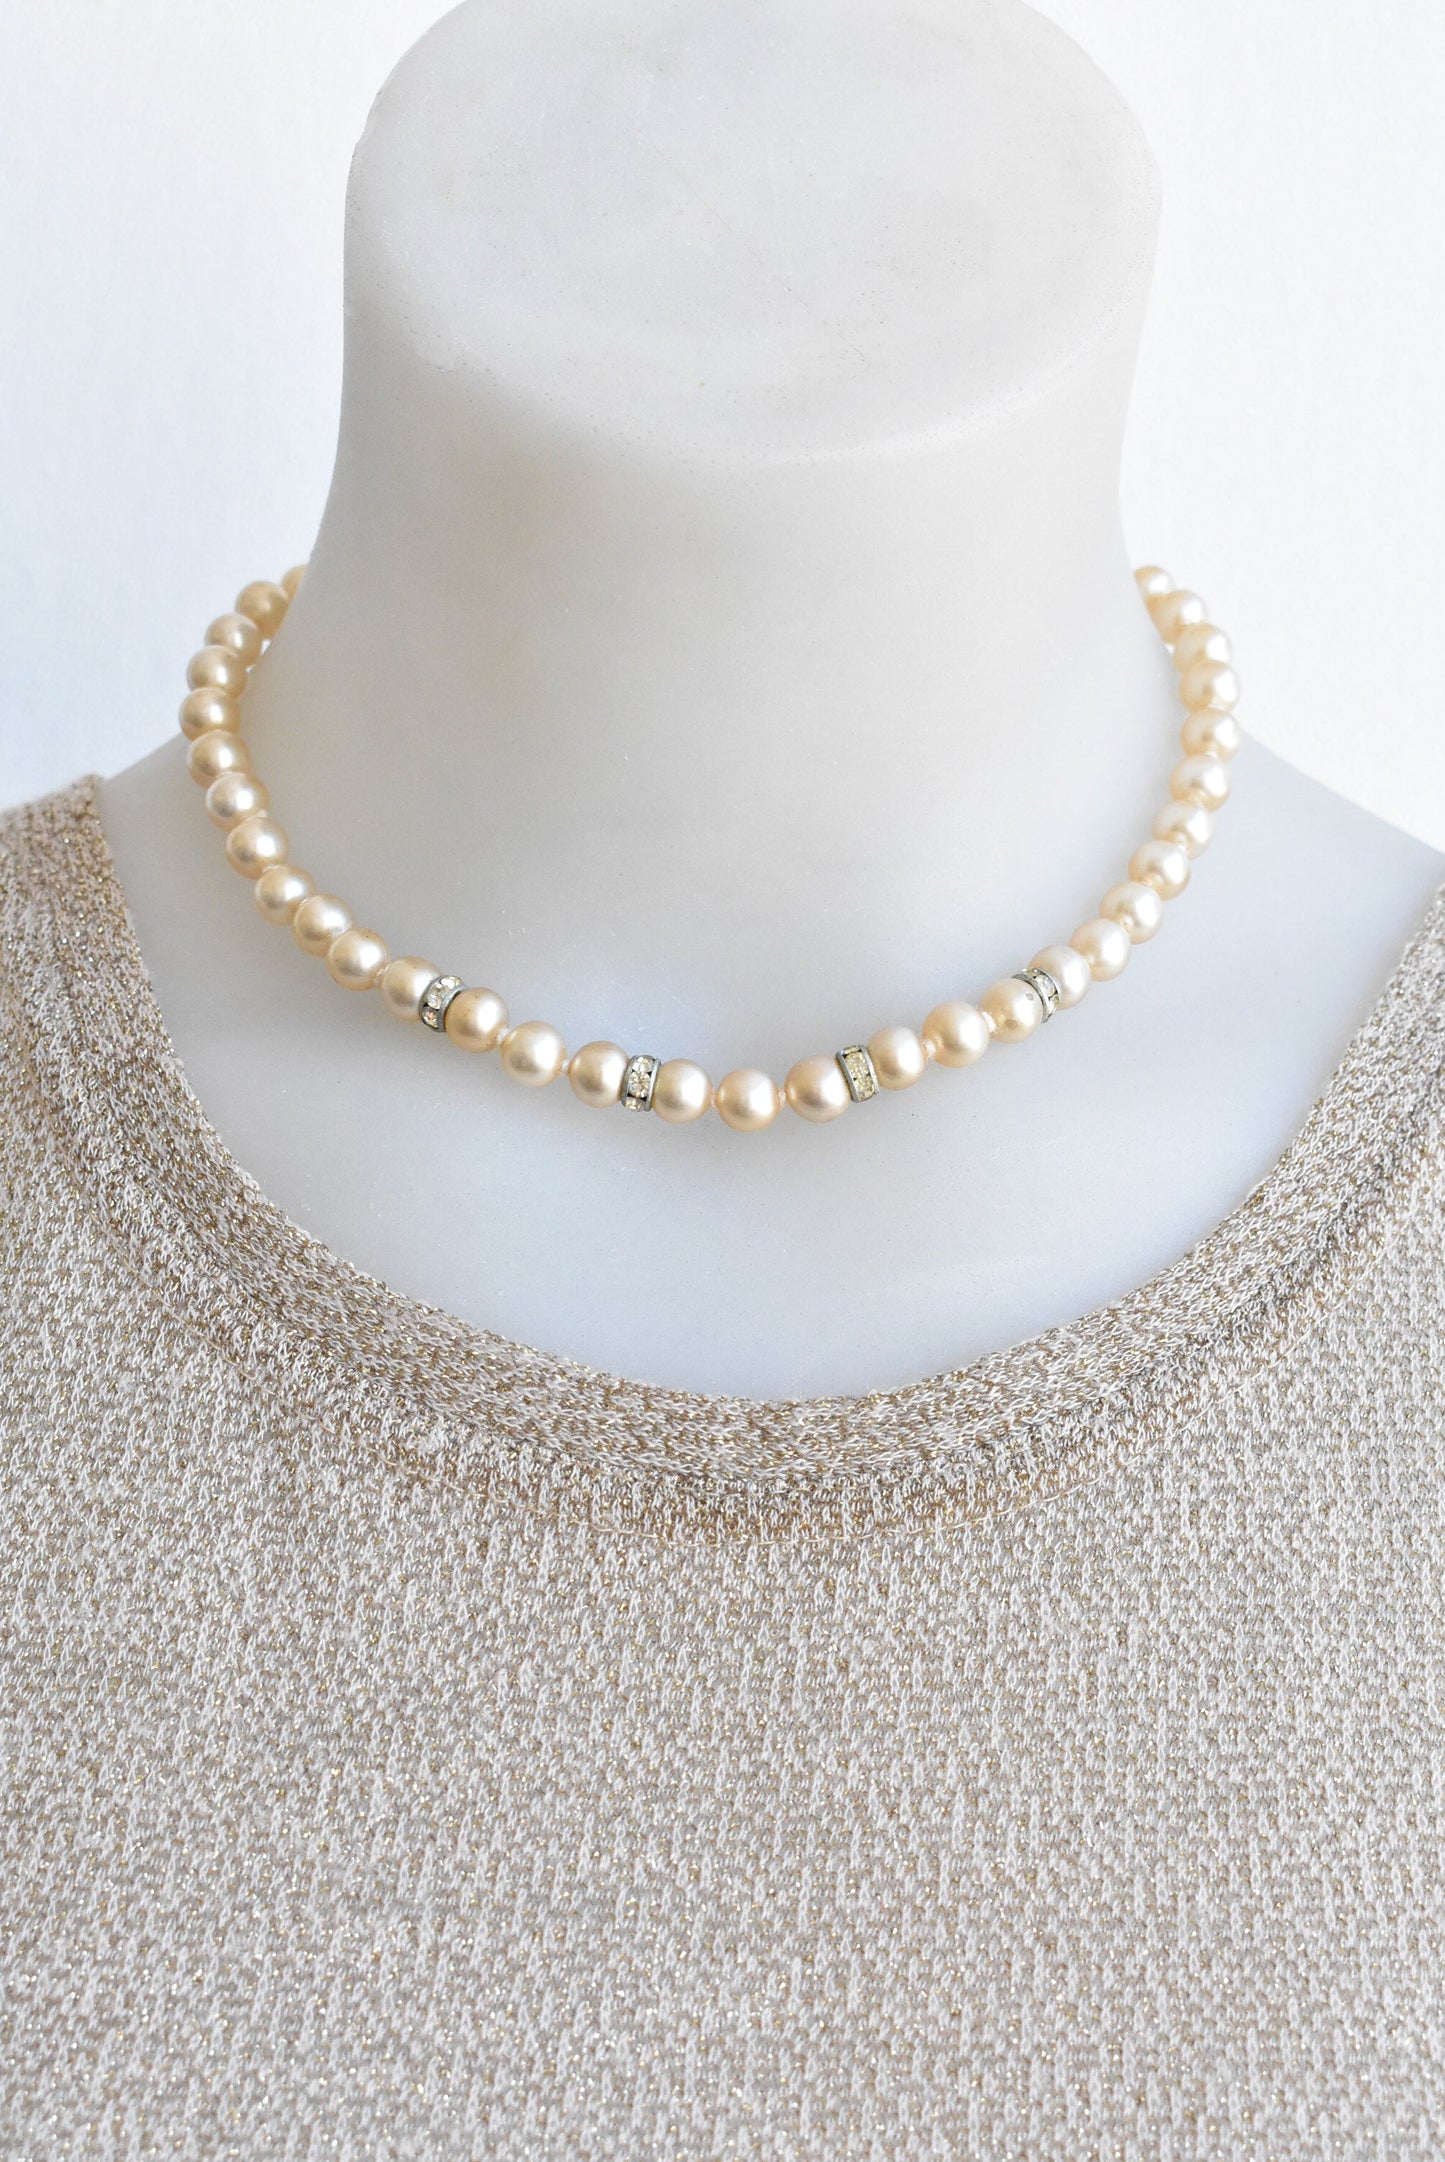 Vintage faux pearl choker with sparkly charms